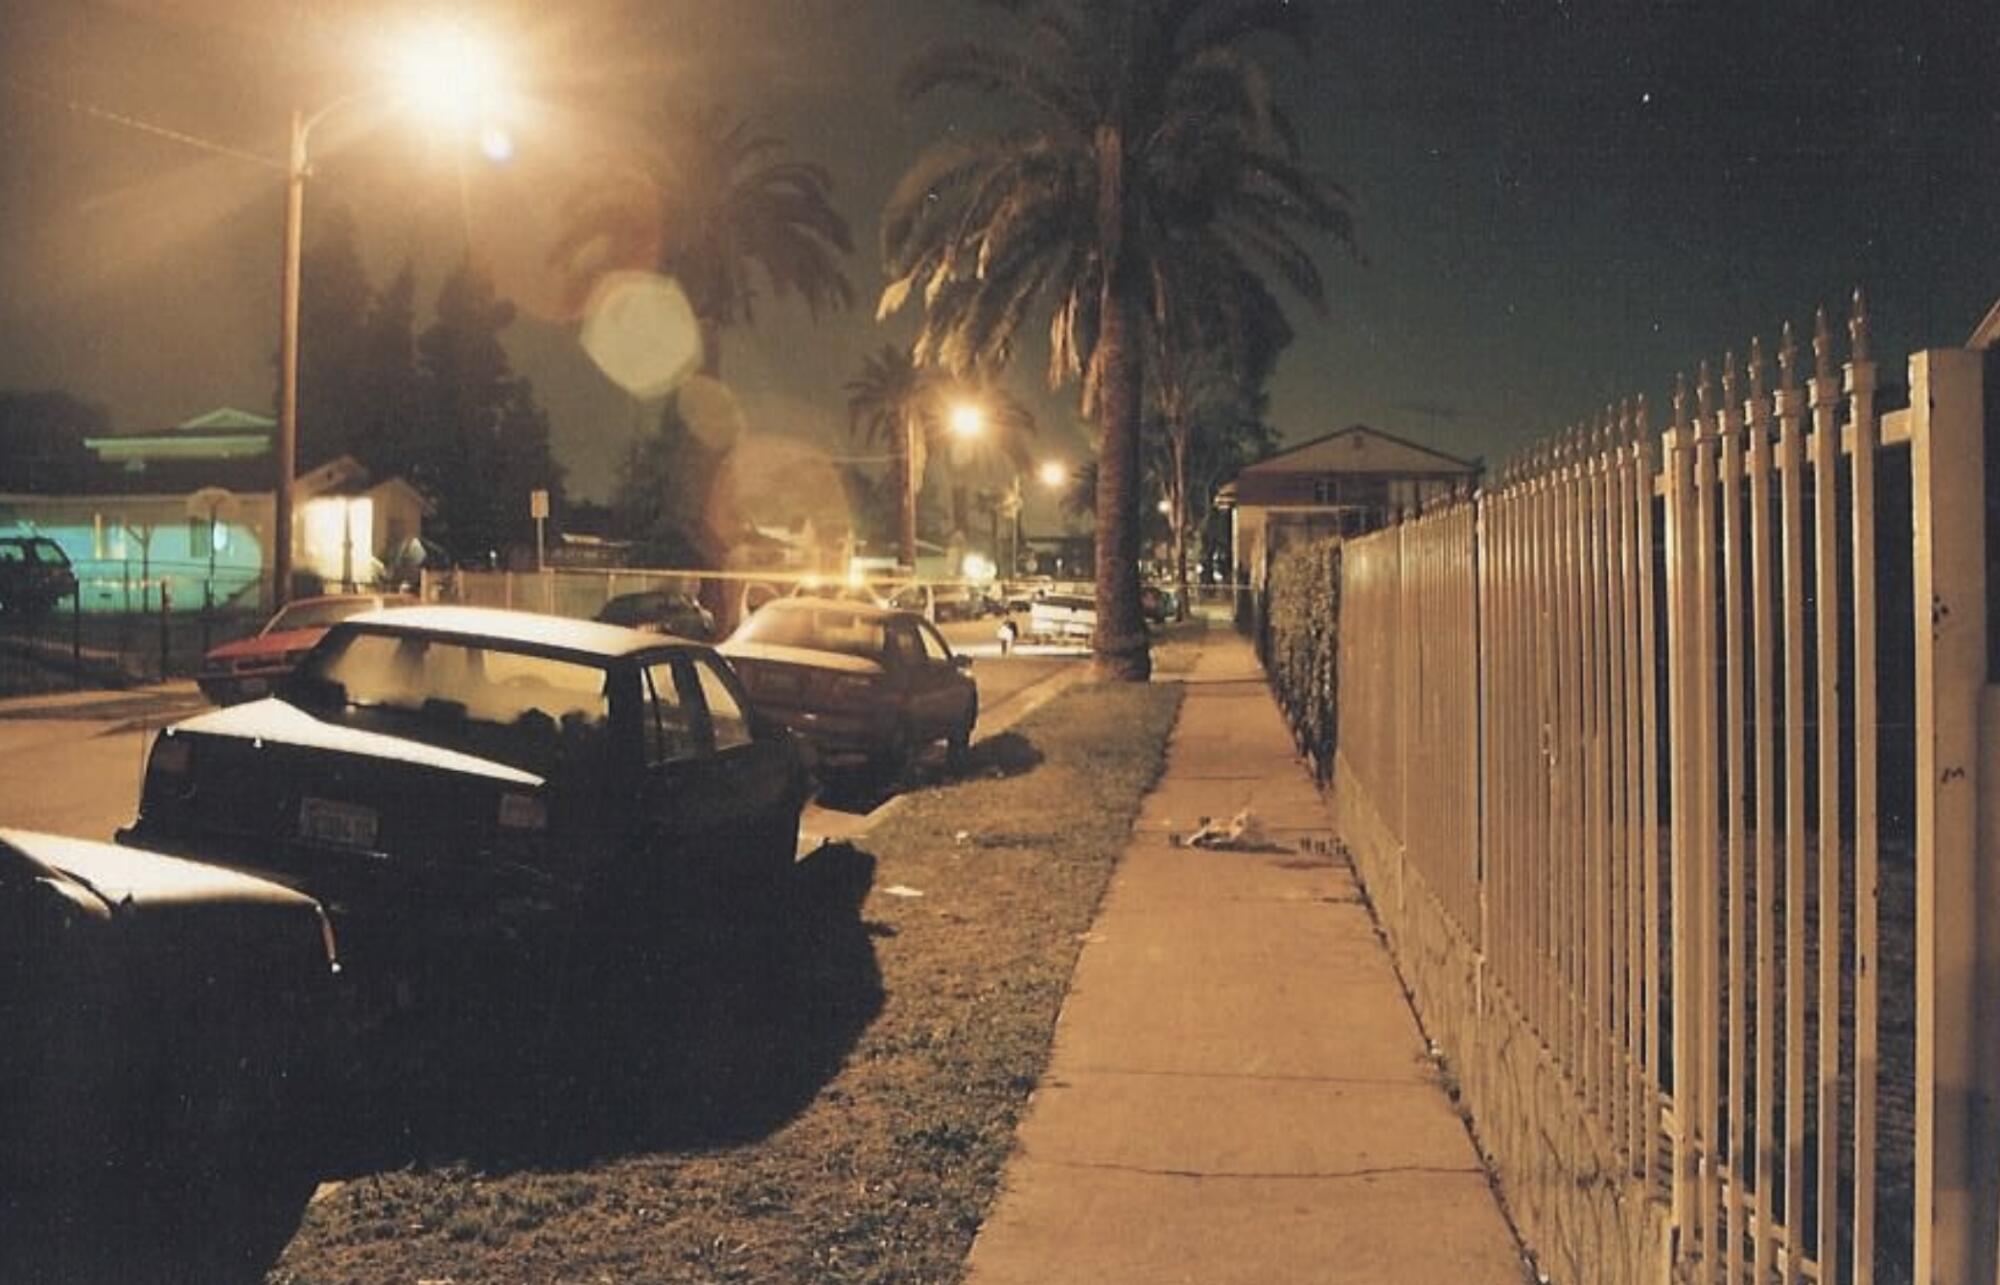 A fence lines a sidewalk, with cars parked in the street, at night.